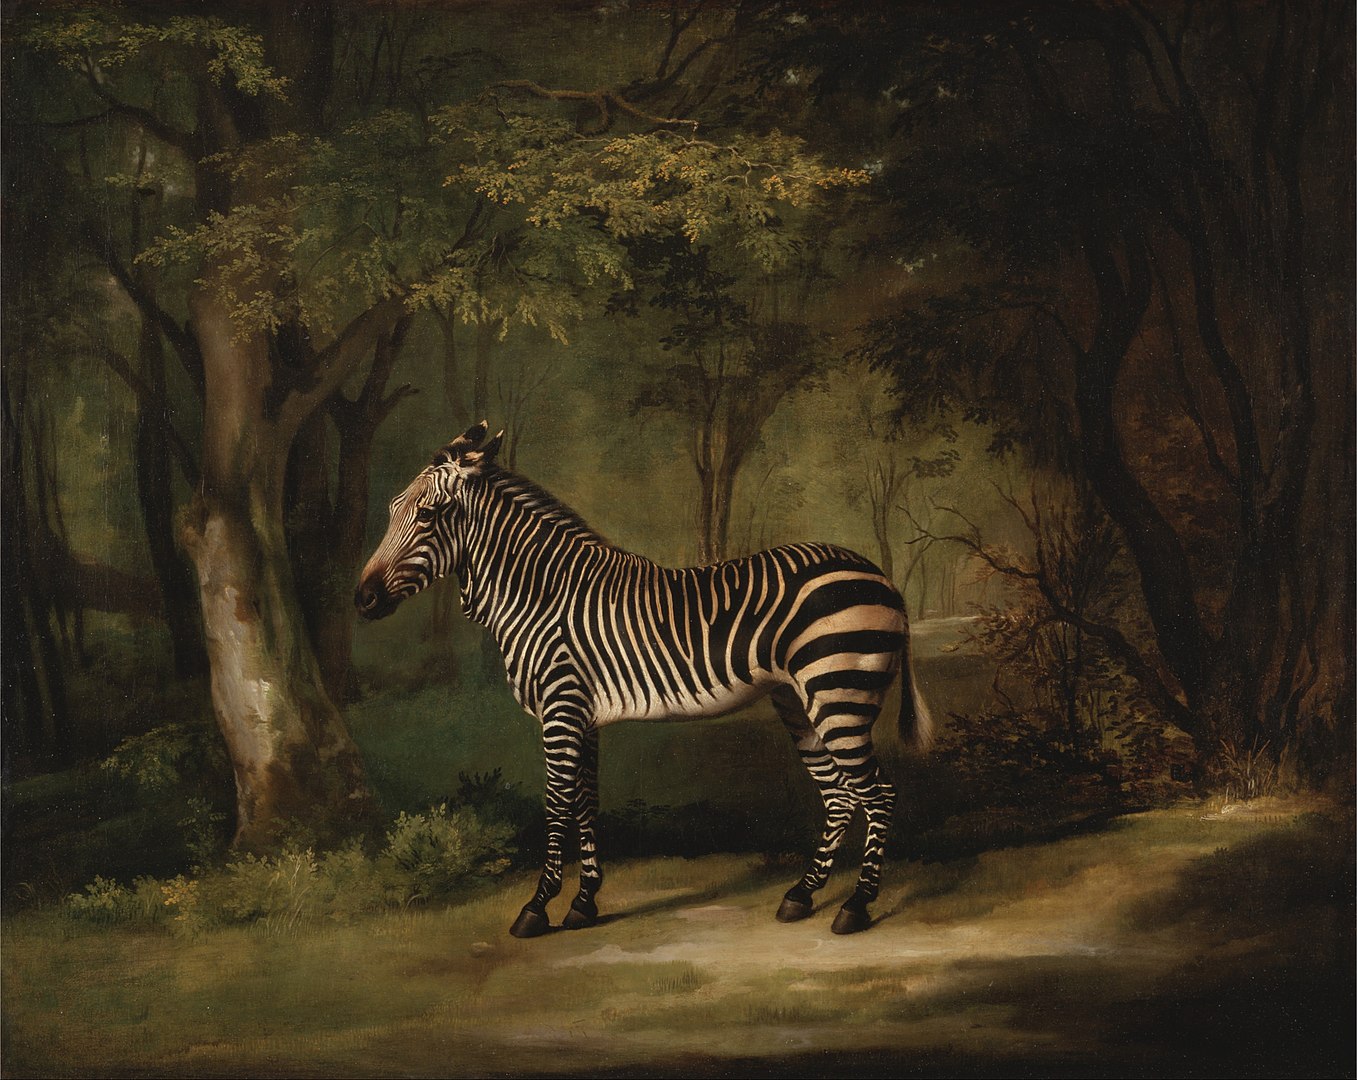 A side profile portrait of a zebra standing in the middle of a forest.